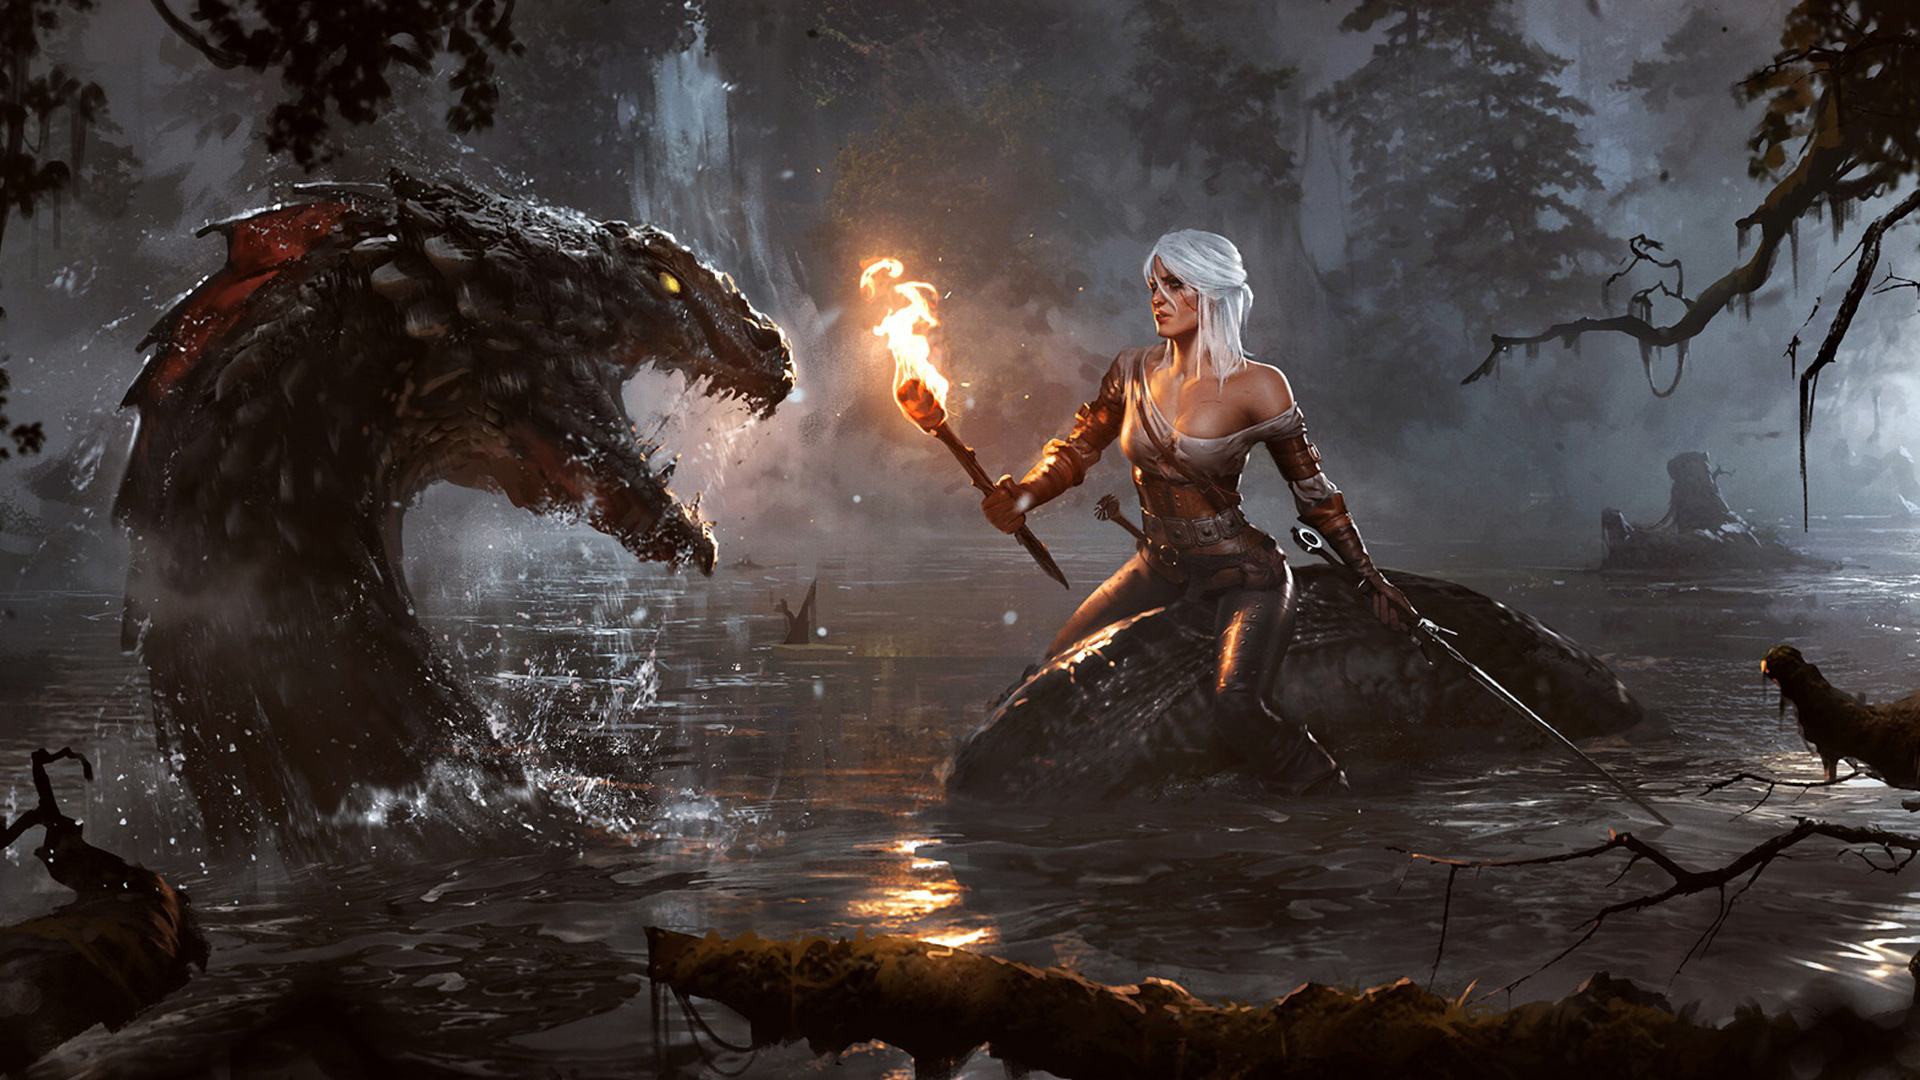 Download Witcher HD Wallpapers TechJeep